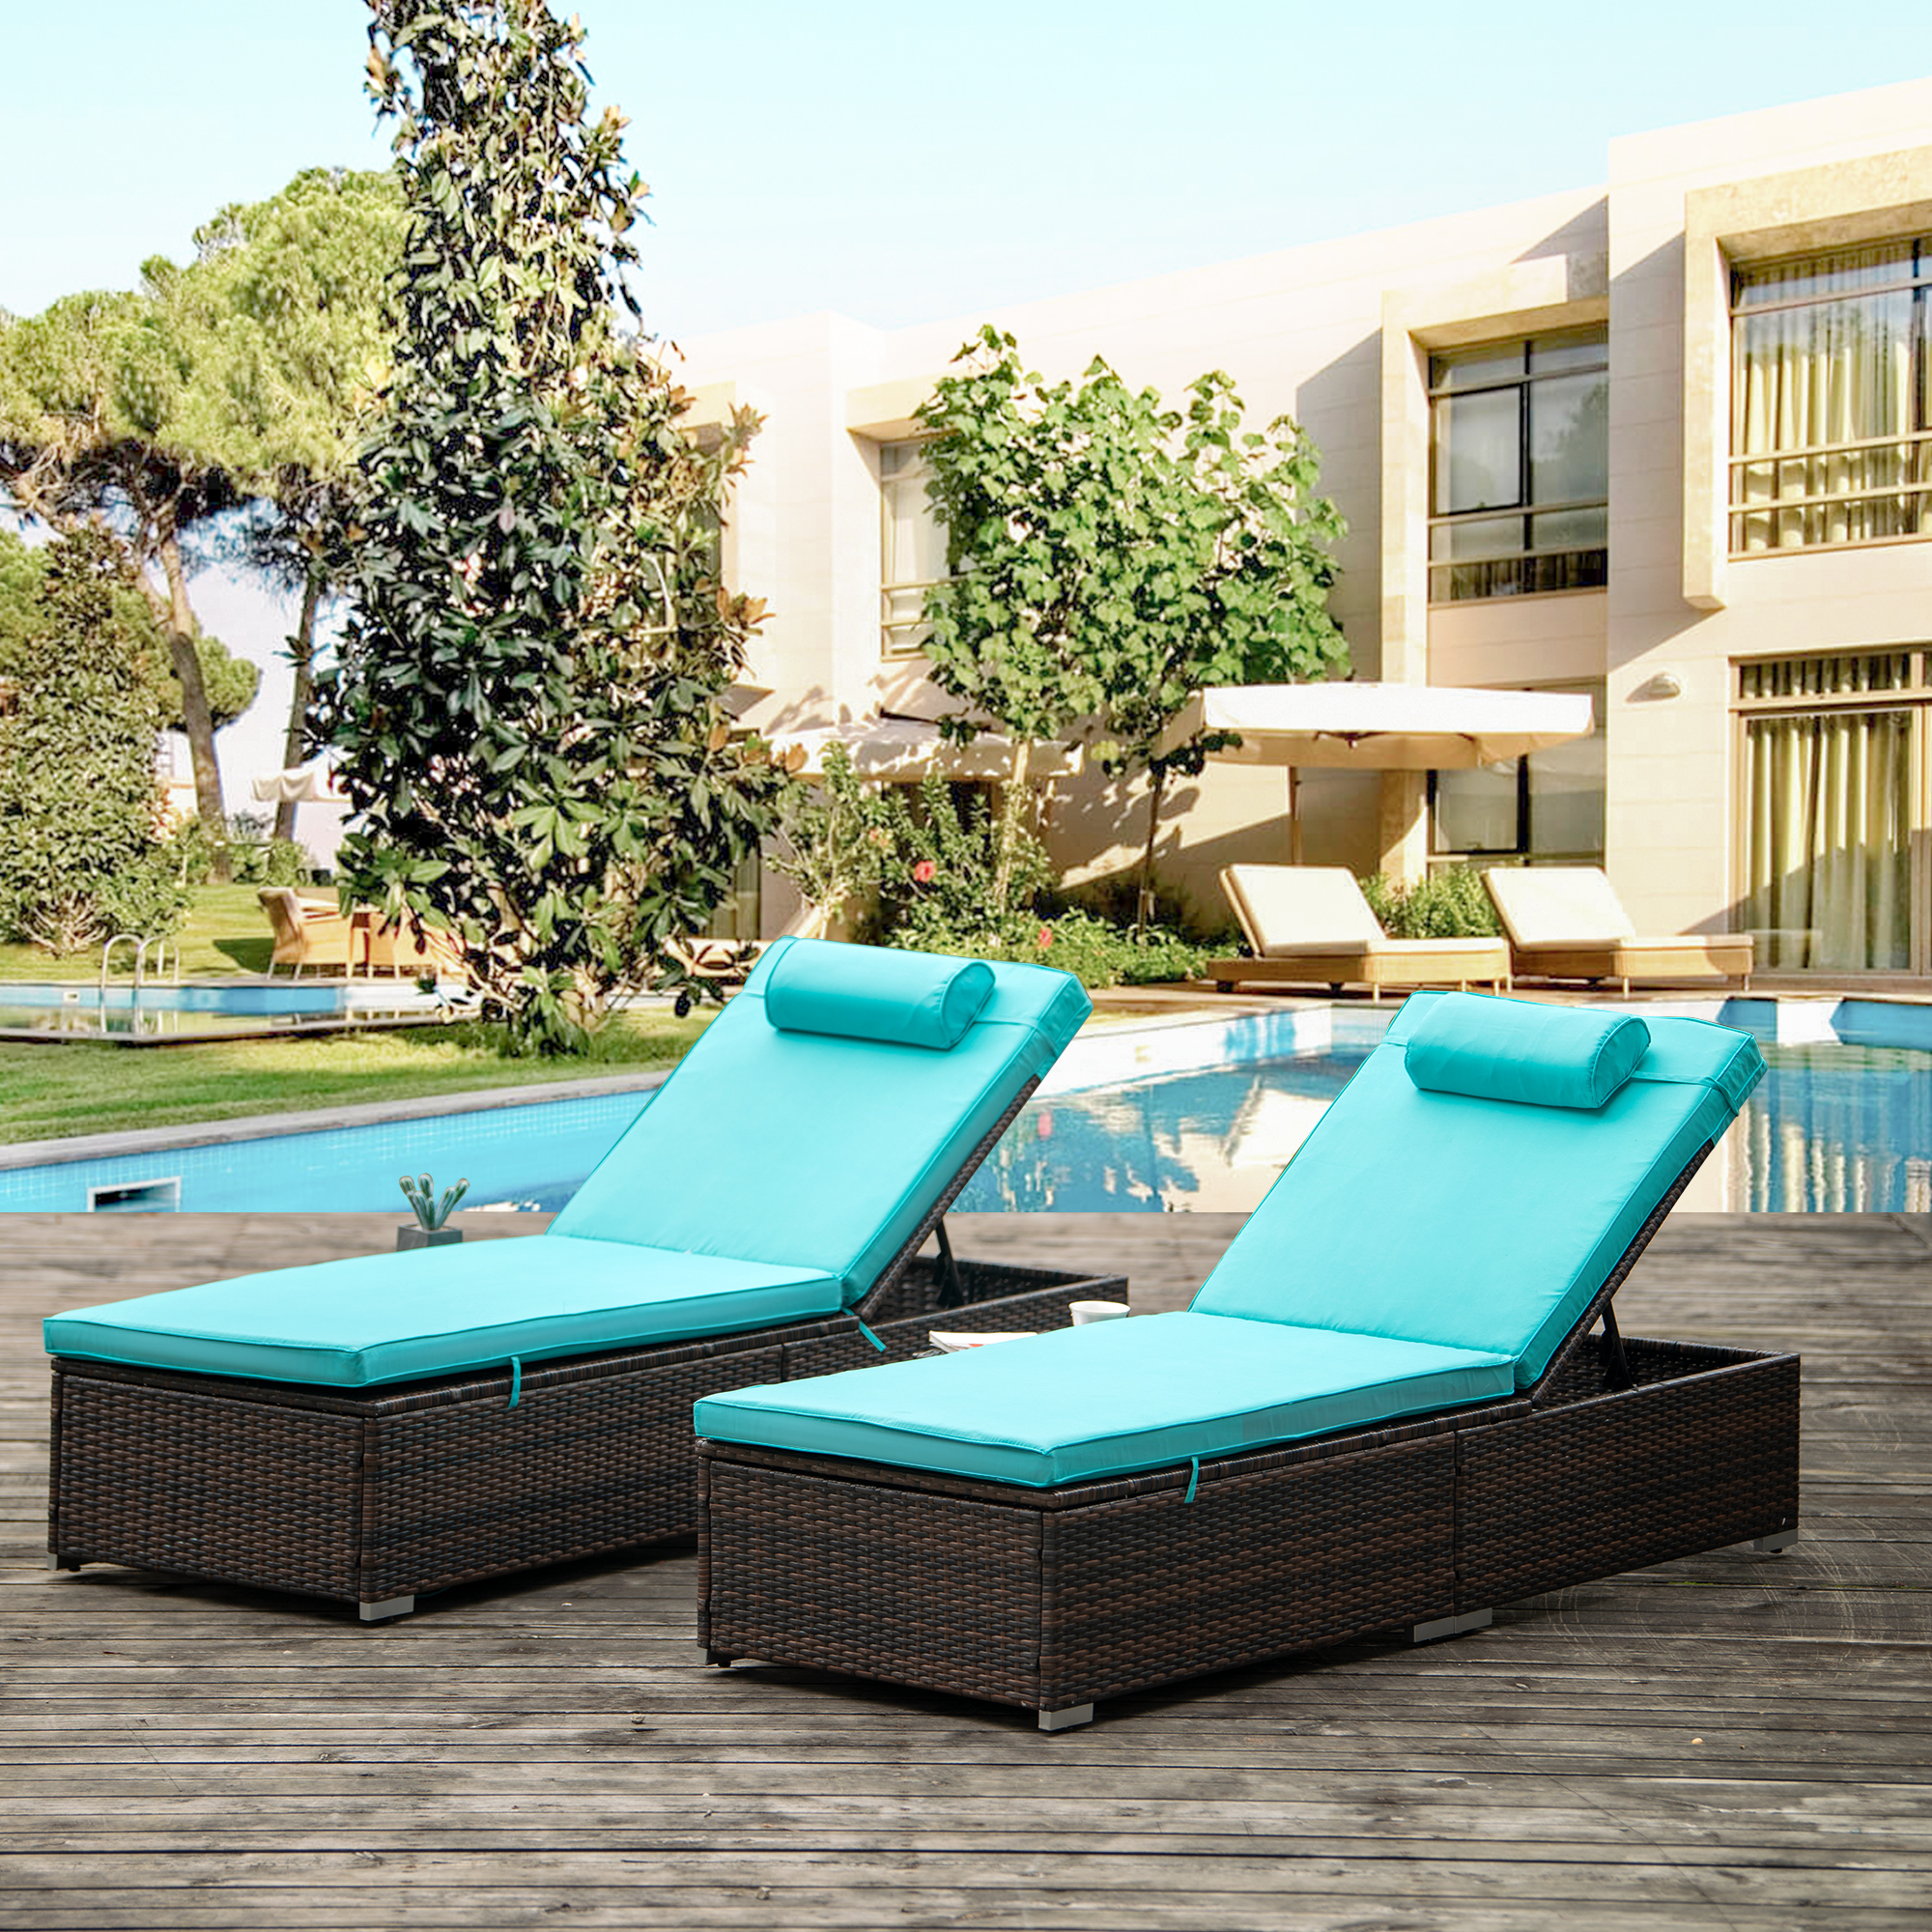 2 Pieces Patio Chaise Lounge Chair Set, PE Rattan Chaise Lounge with Side Table, Sun Chaise Lounge Furniture, Pool Furniture Sunbed with Cushion, Tanning Lounge Chair with 5 Adjustable Positions, B381 - image 1 of 8